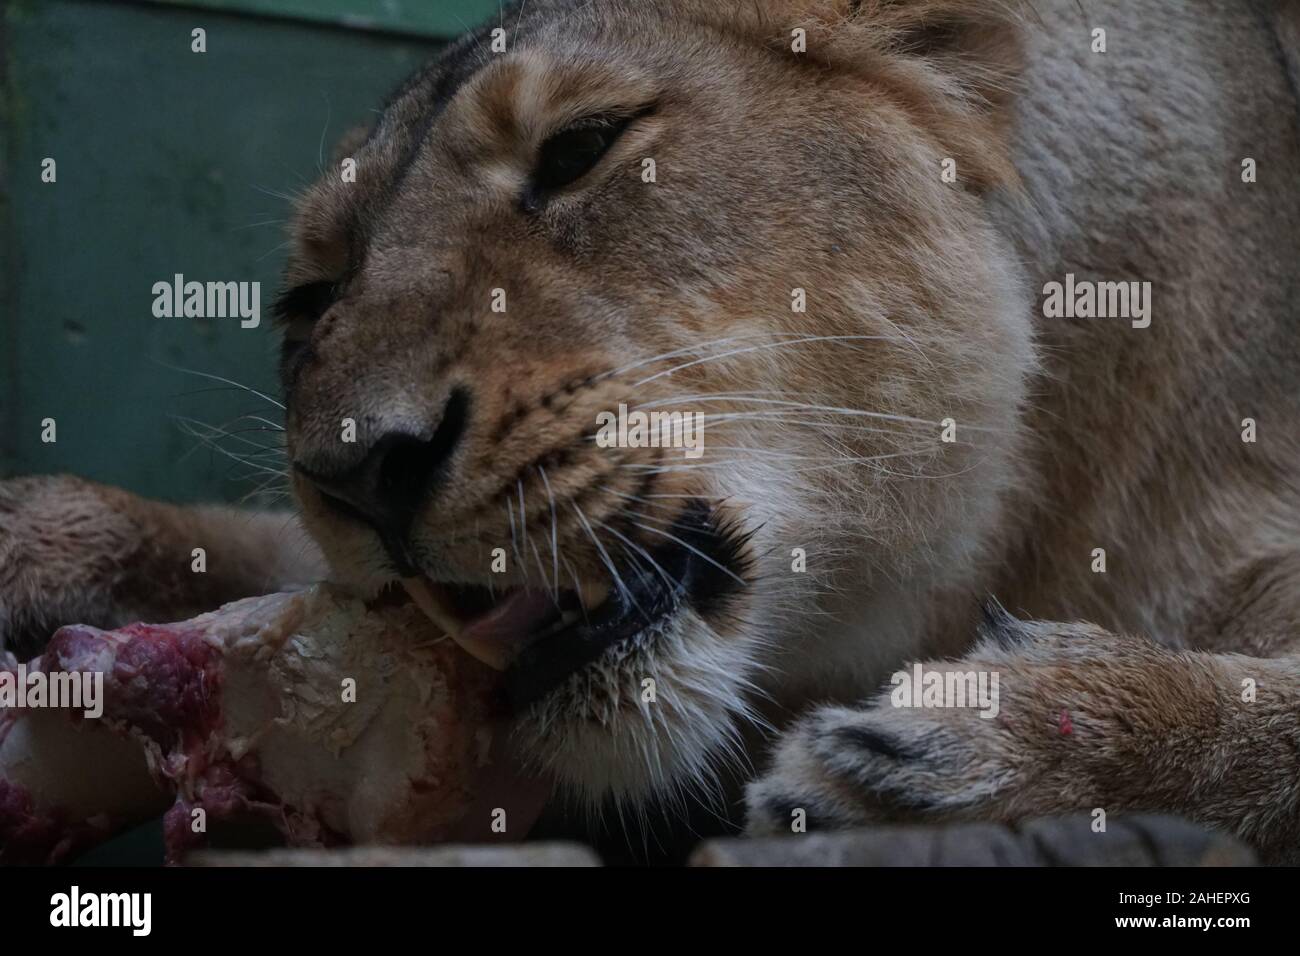 lioness in zoo eating meet Stock Photo